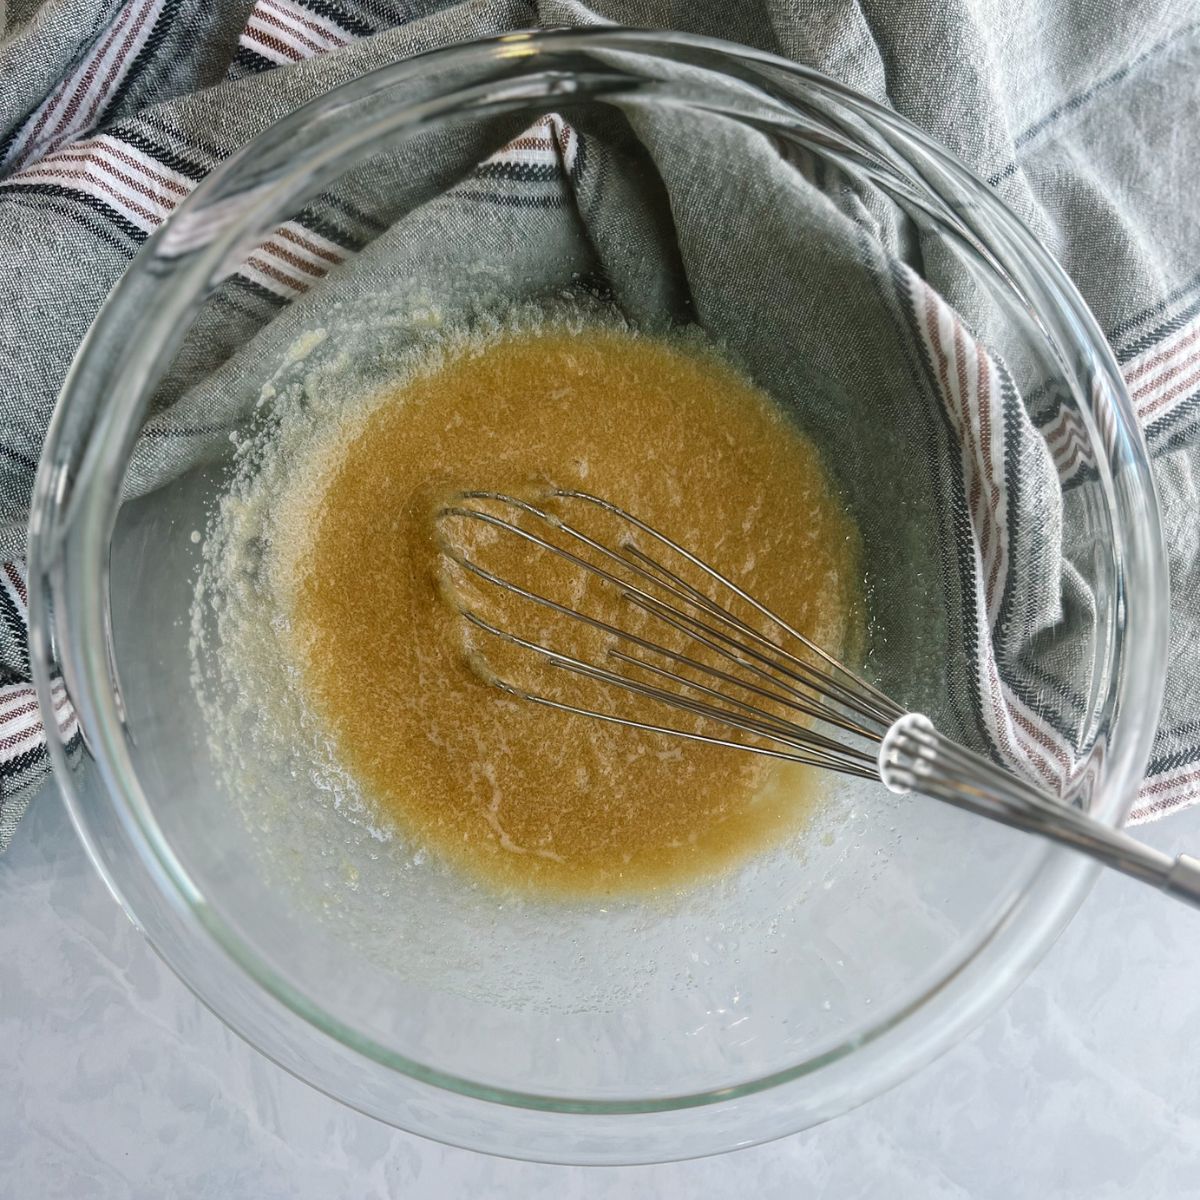 Mixing bowl with a whisk in and melted butter and sugars in the bowl.